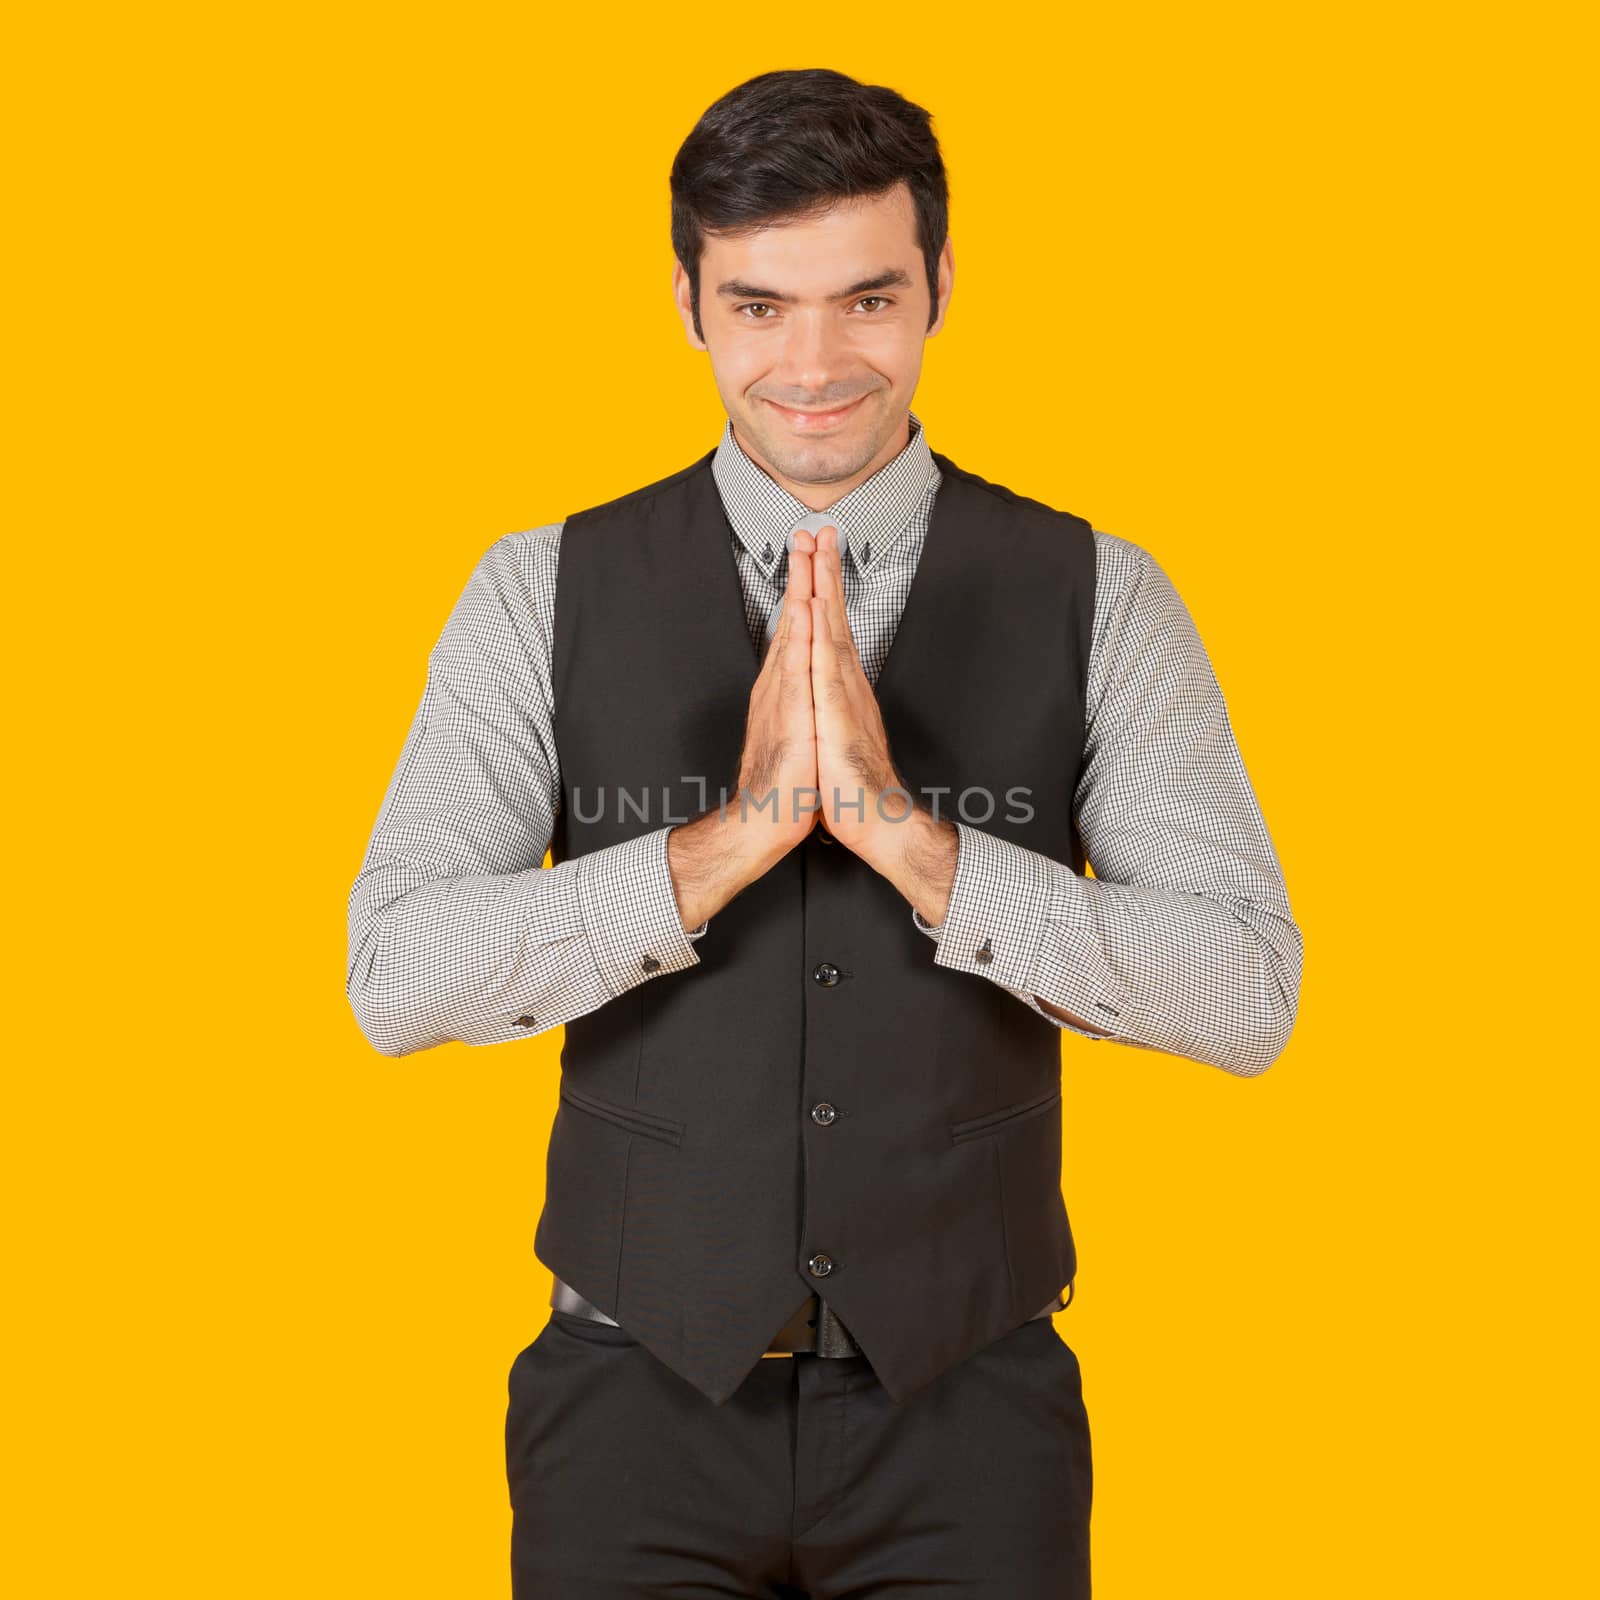 Young businessman in a gray shirt and black vest press the hands together at the chest in sign of respect, smiling and bowing a little. Concept of business relationships. Portrait on yellow background